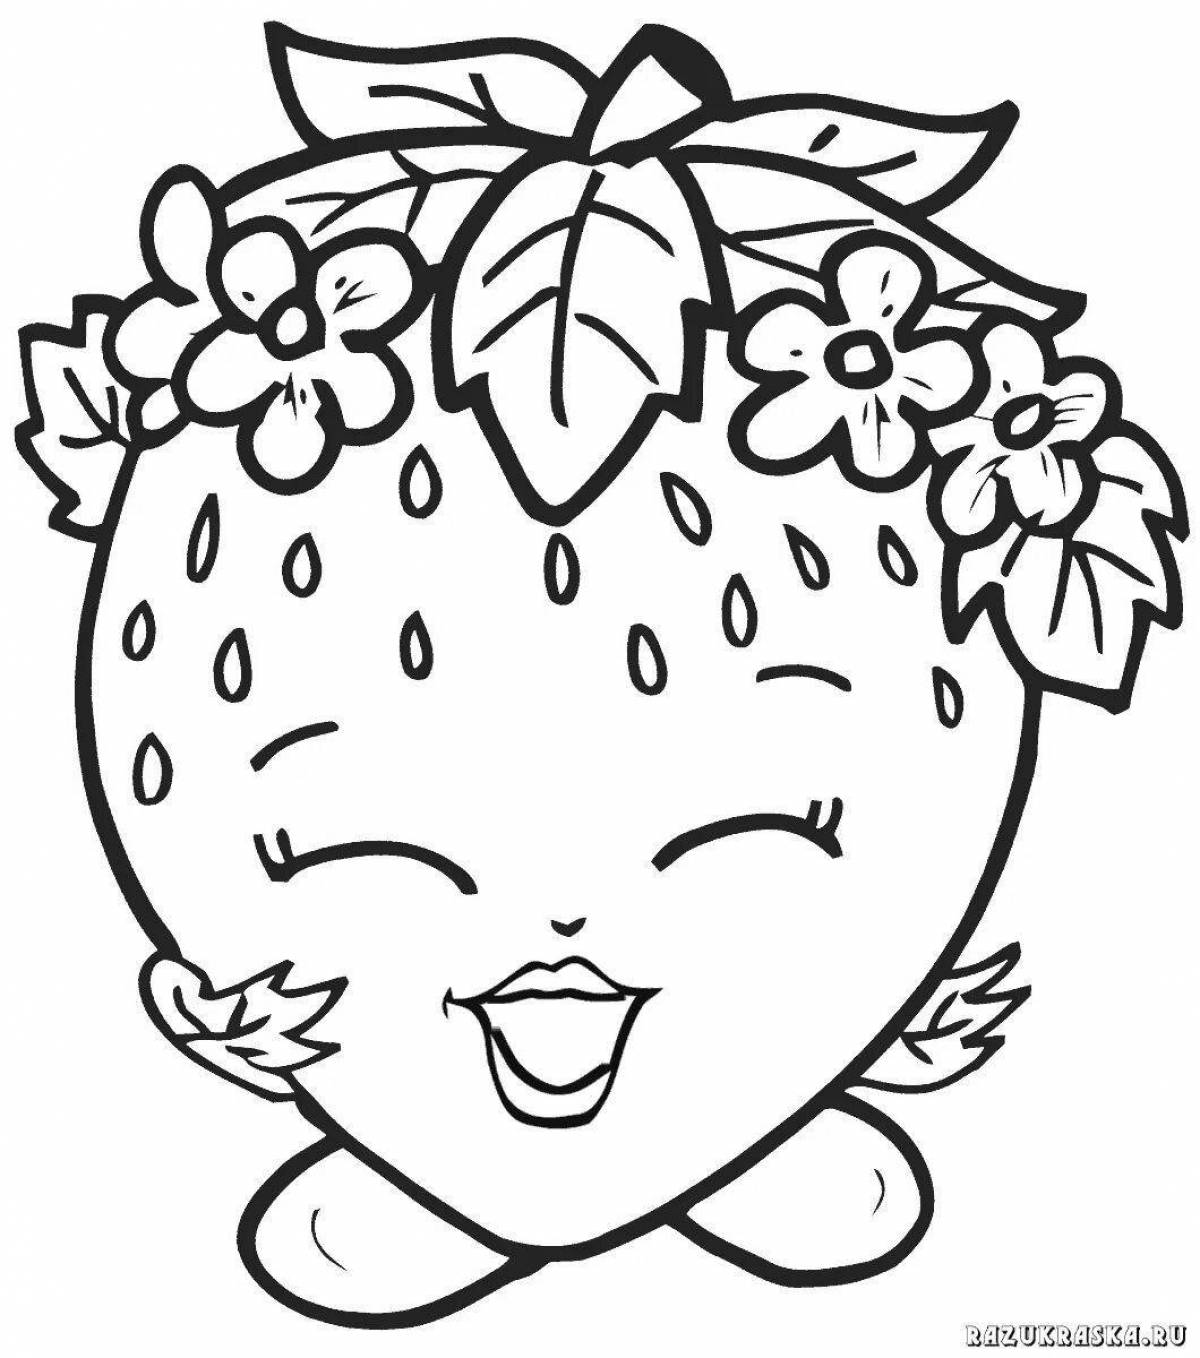 Coloring page delicious berries for girls